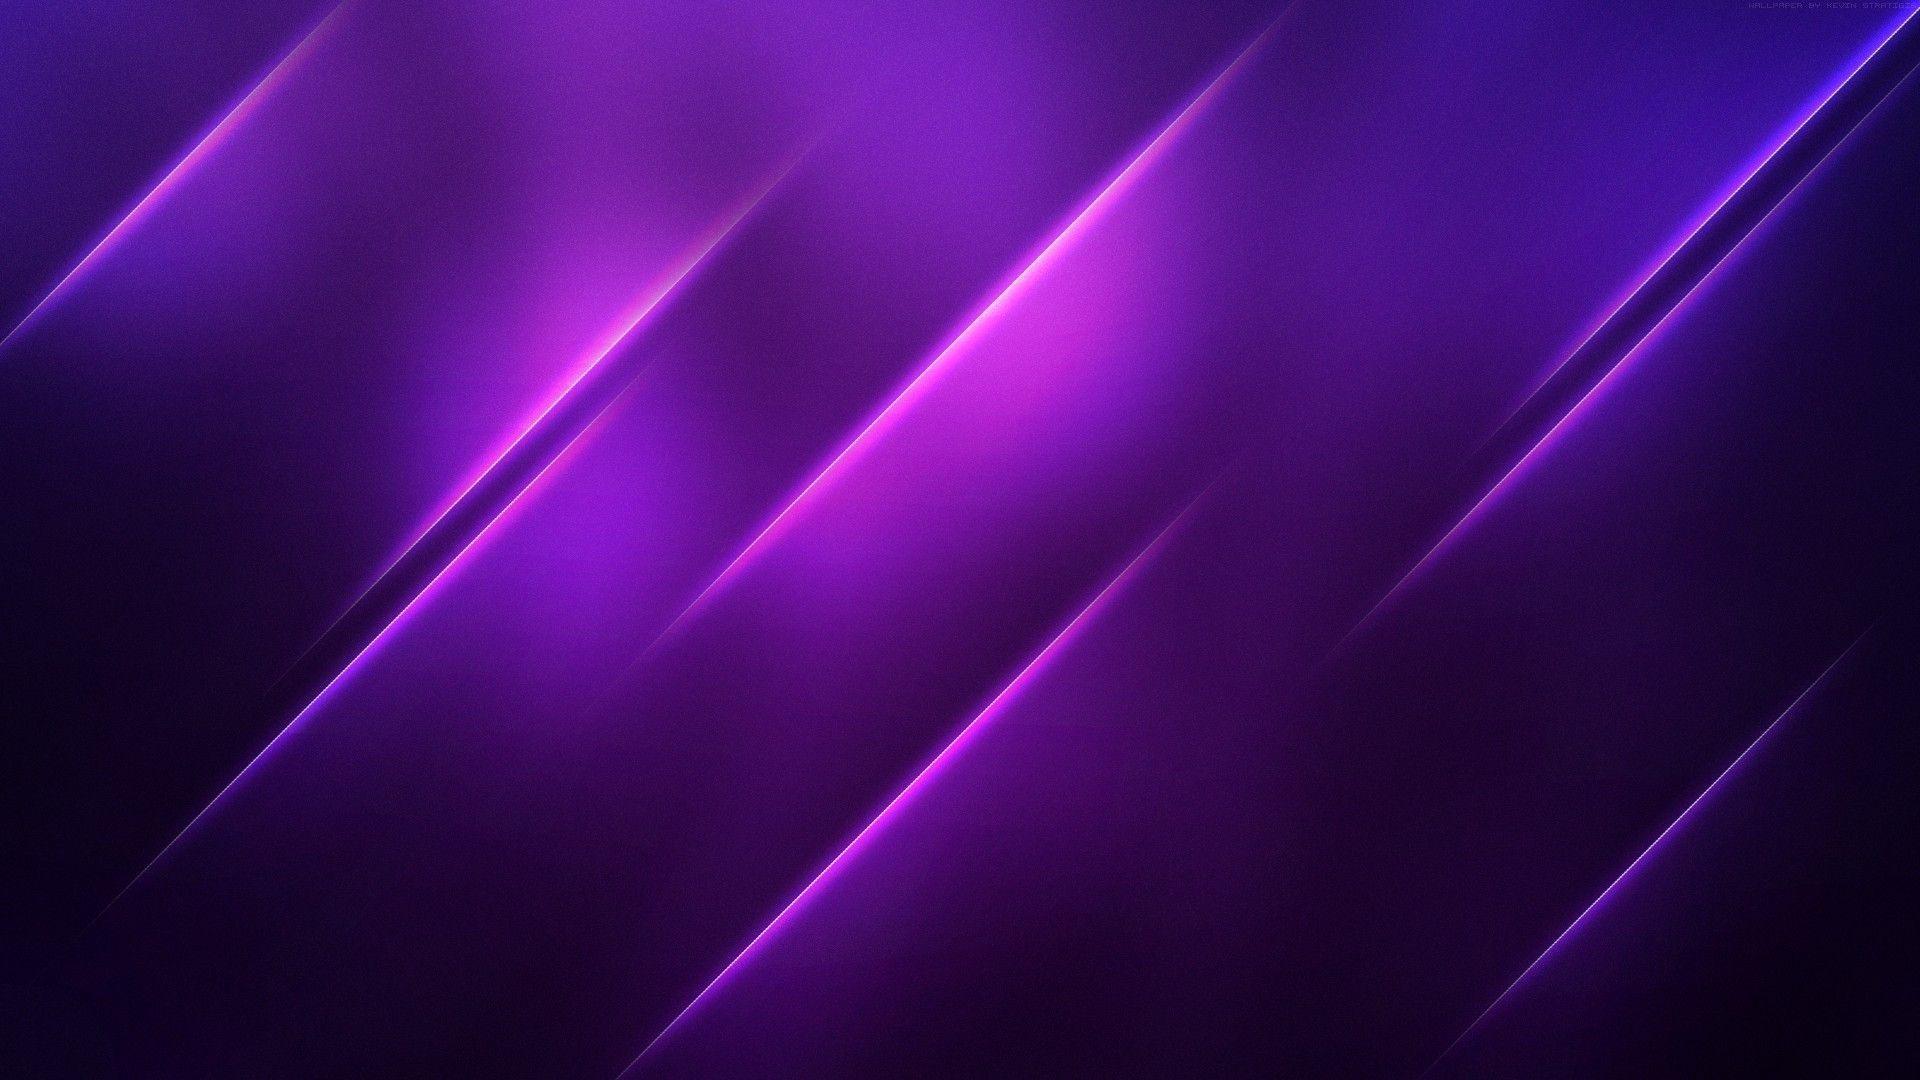 Solid Purple Backgrounds, wallpaper, Solid Purple Backgrounds hd